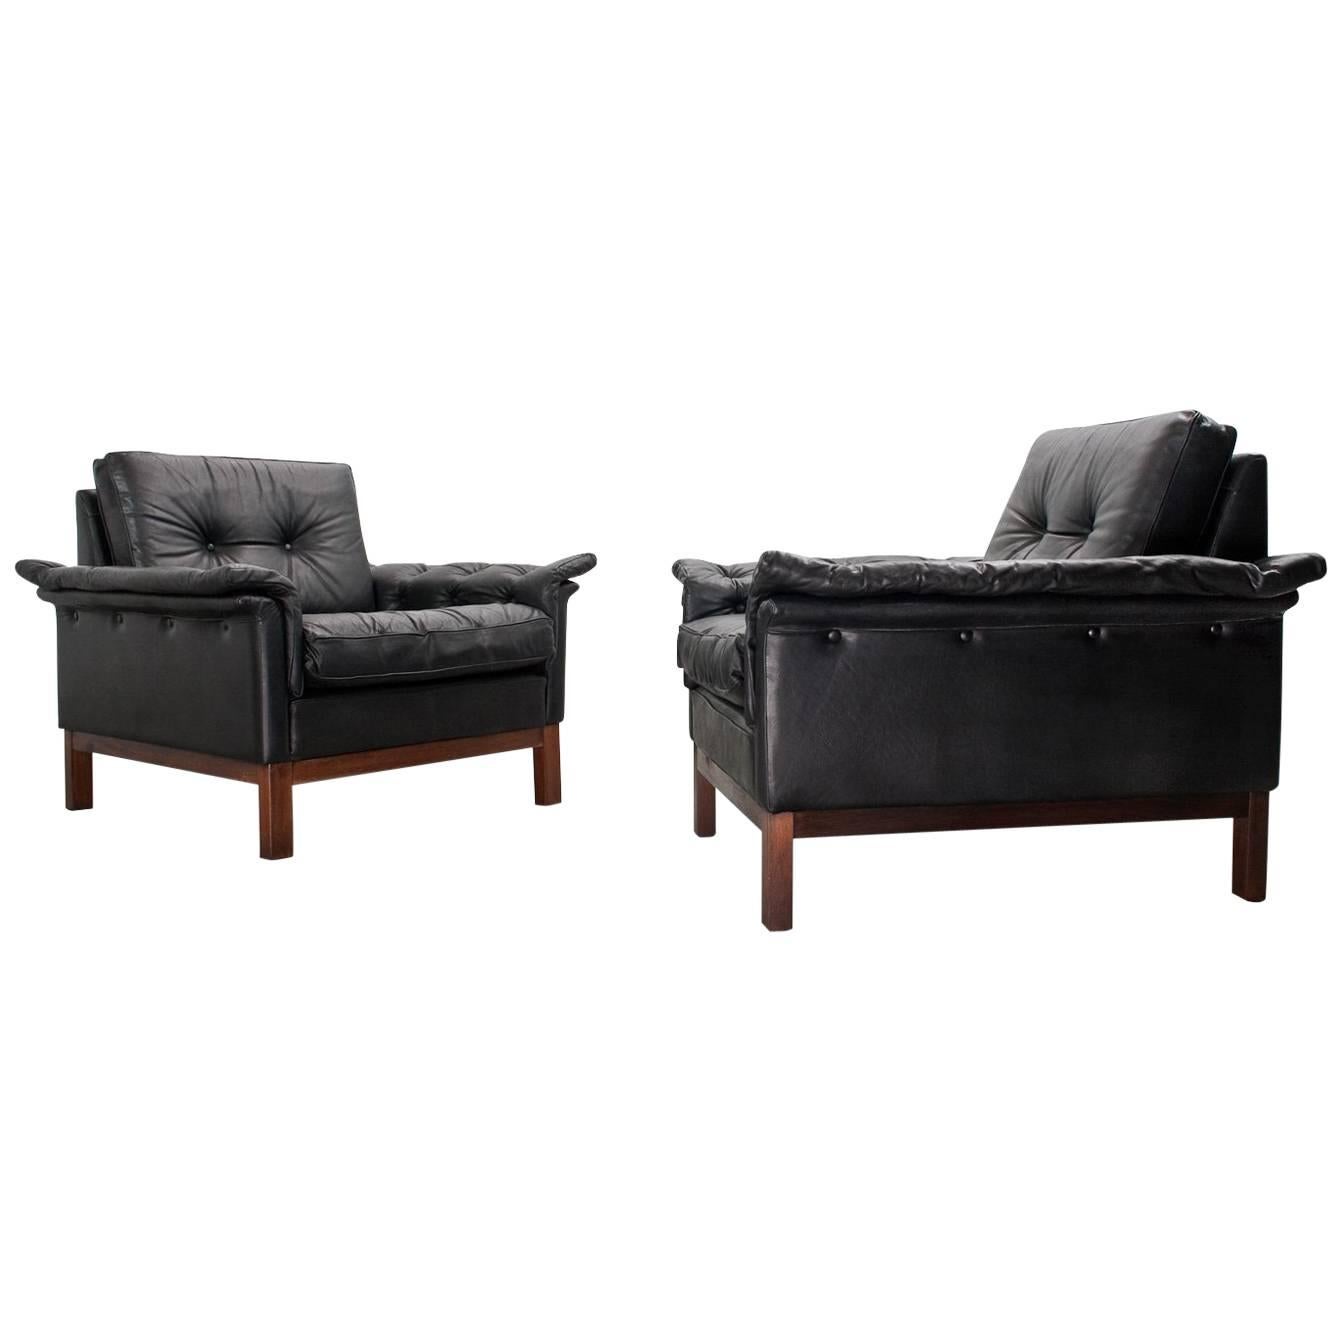 Scandinavian Midcentury Modern Pair of Leather Lounge Chairs 1950s